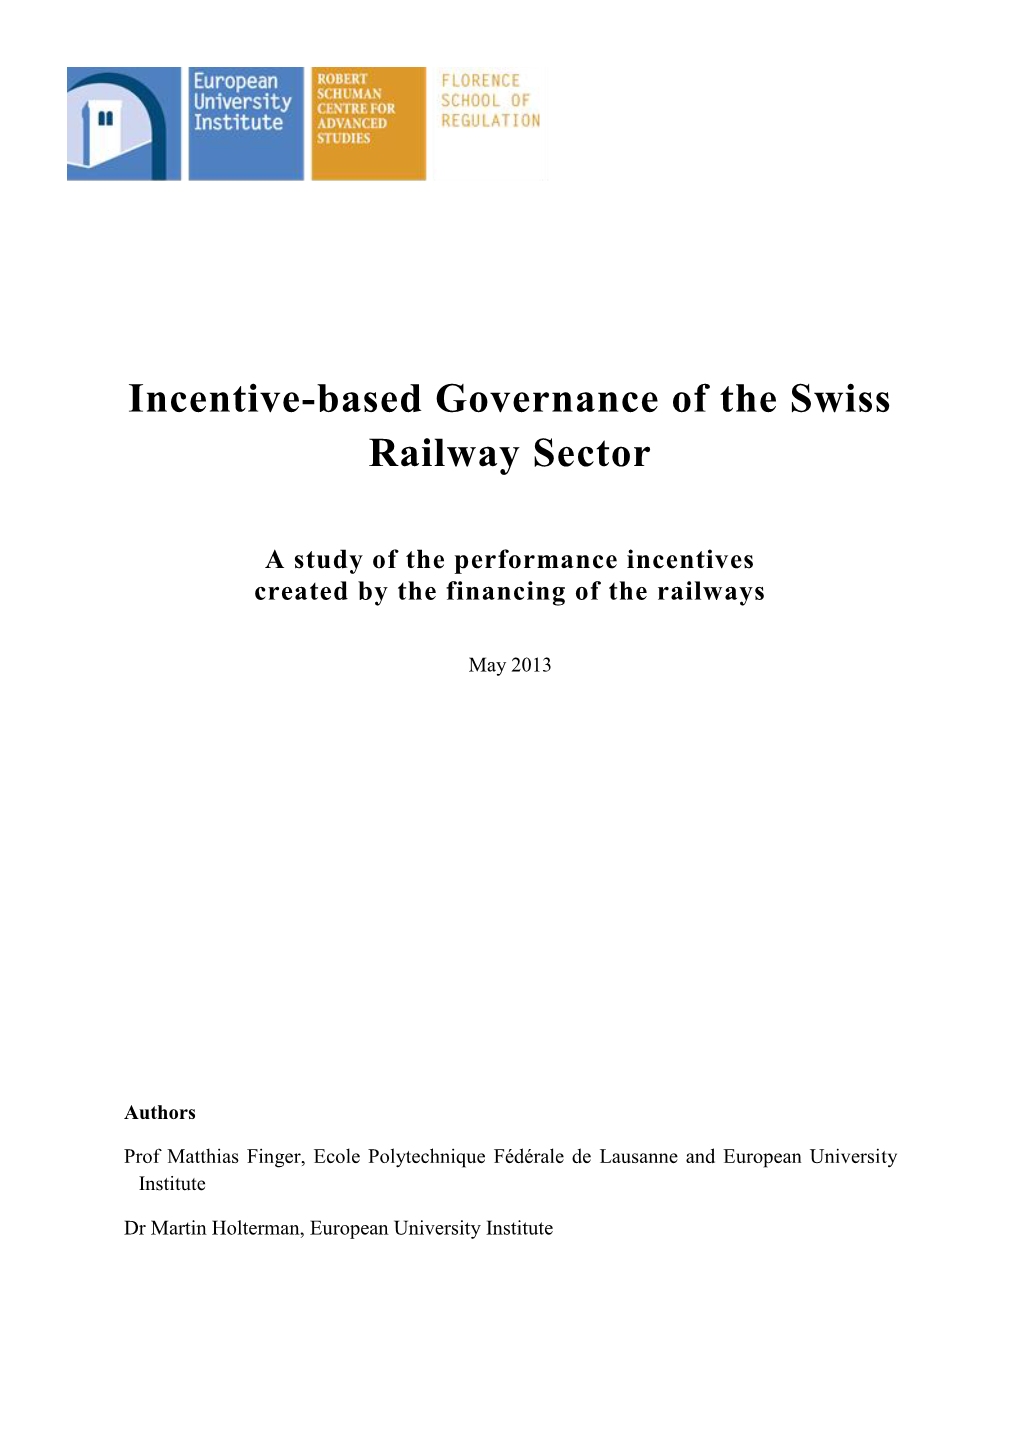 Incentive-Based Governance of the Swiss Railway Sector